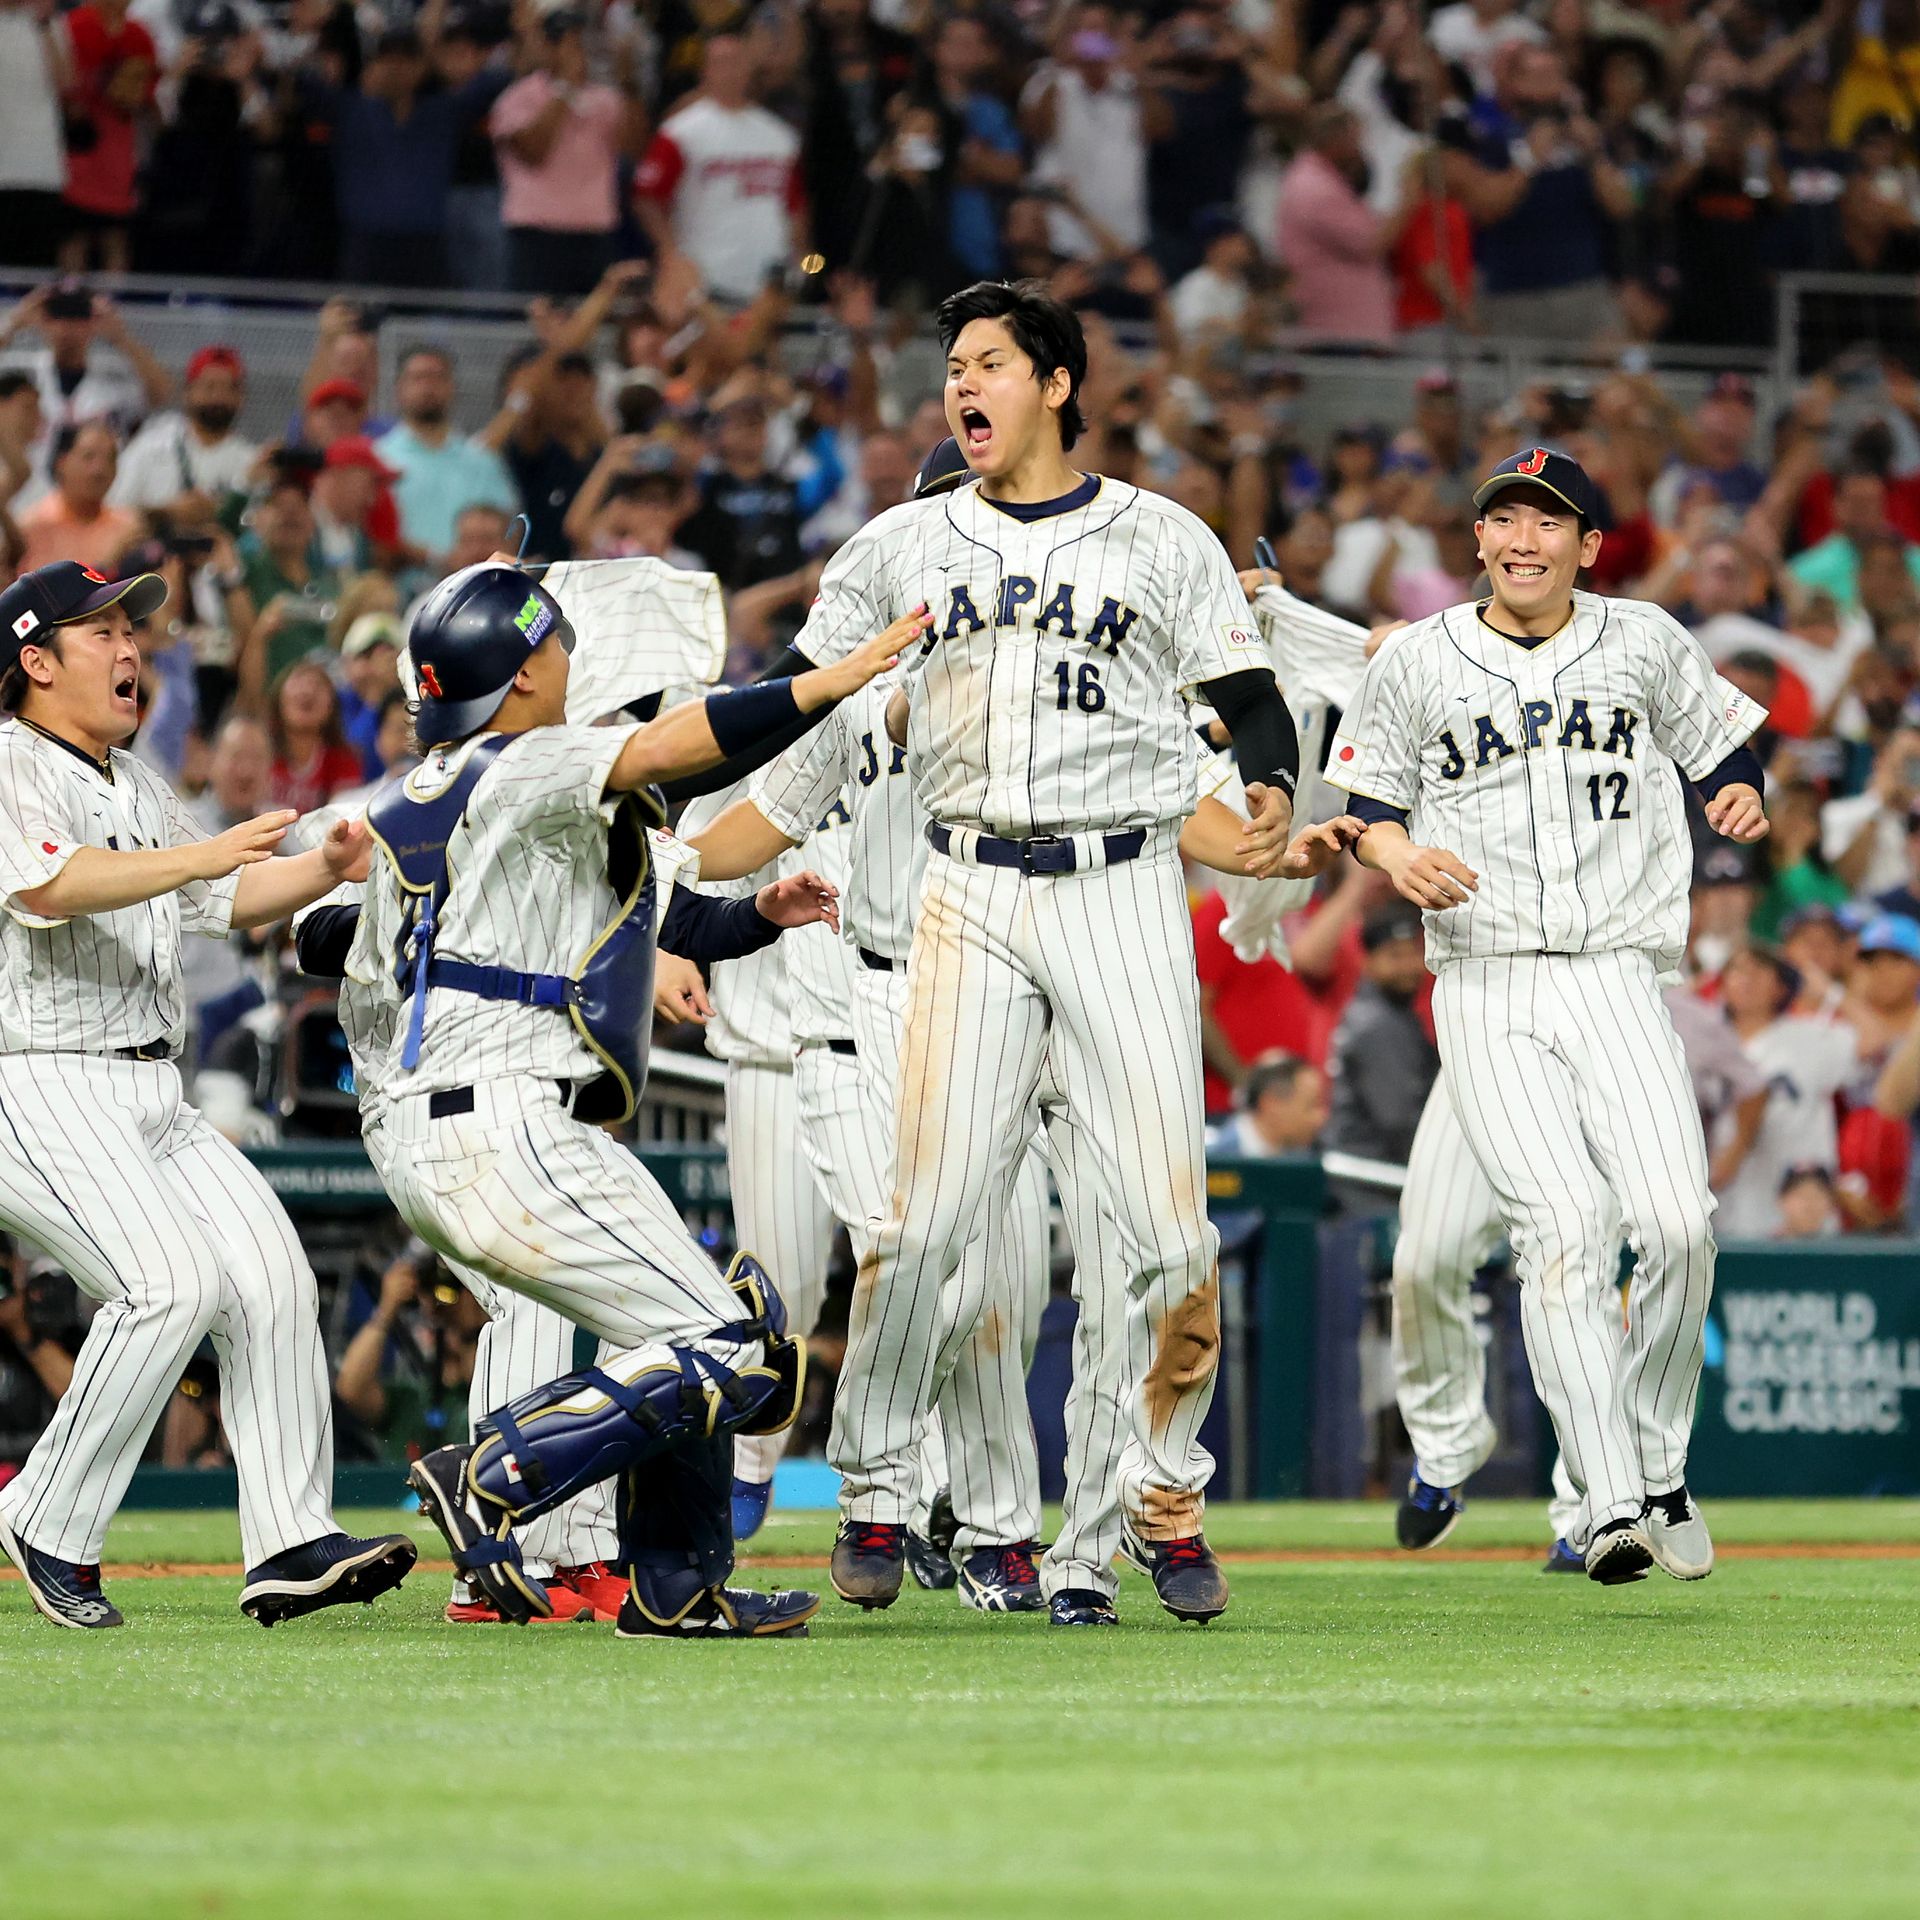 FEATURE: Major league stars put Japan on track to reclaim WBC crown